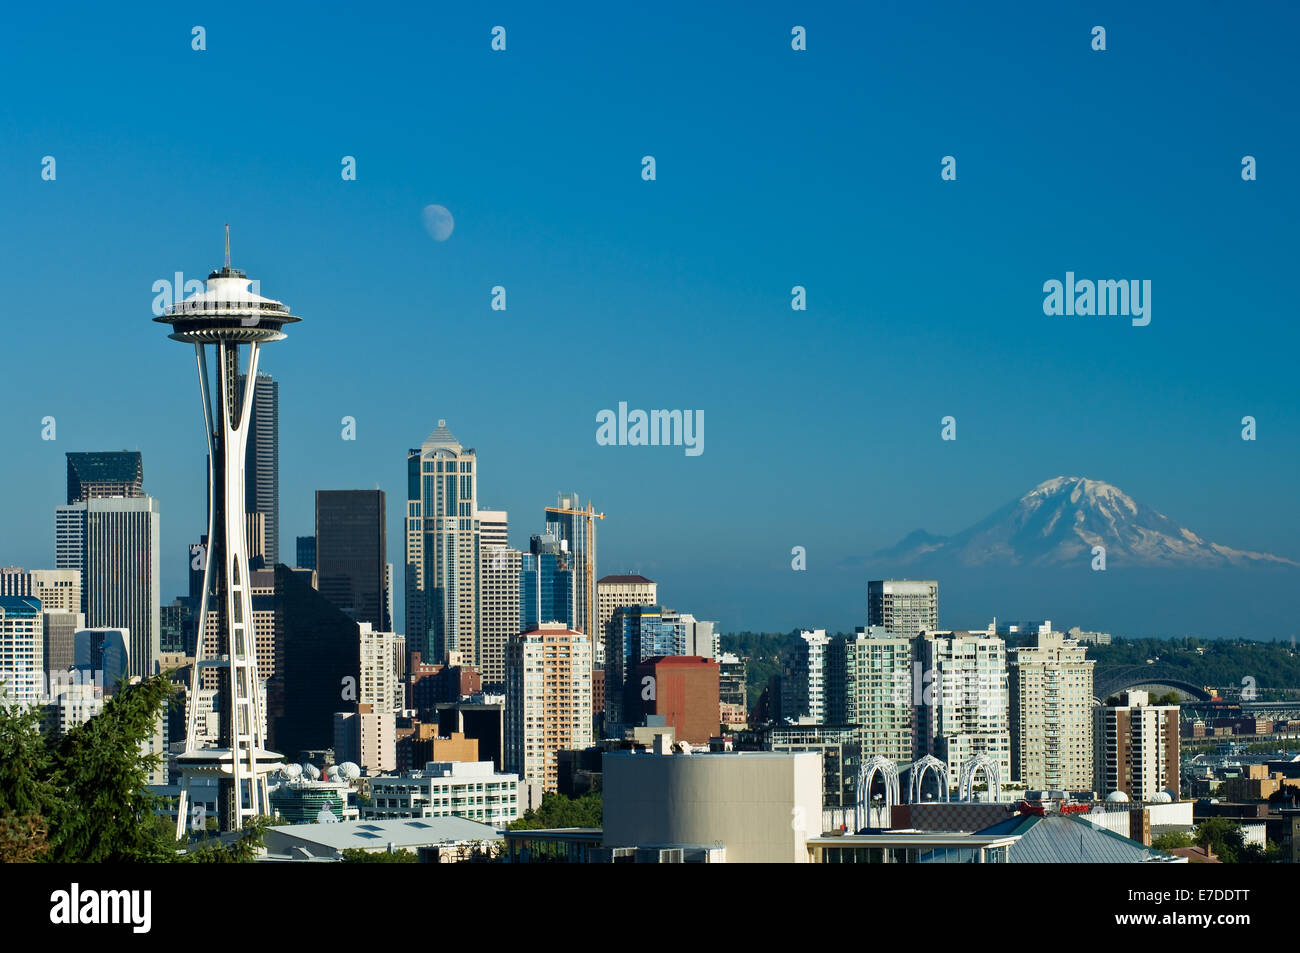 Downtown Seattle with a view of the Space Needle, Mount Rainier, and a nearly full moon. Stock Photo